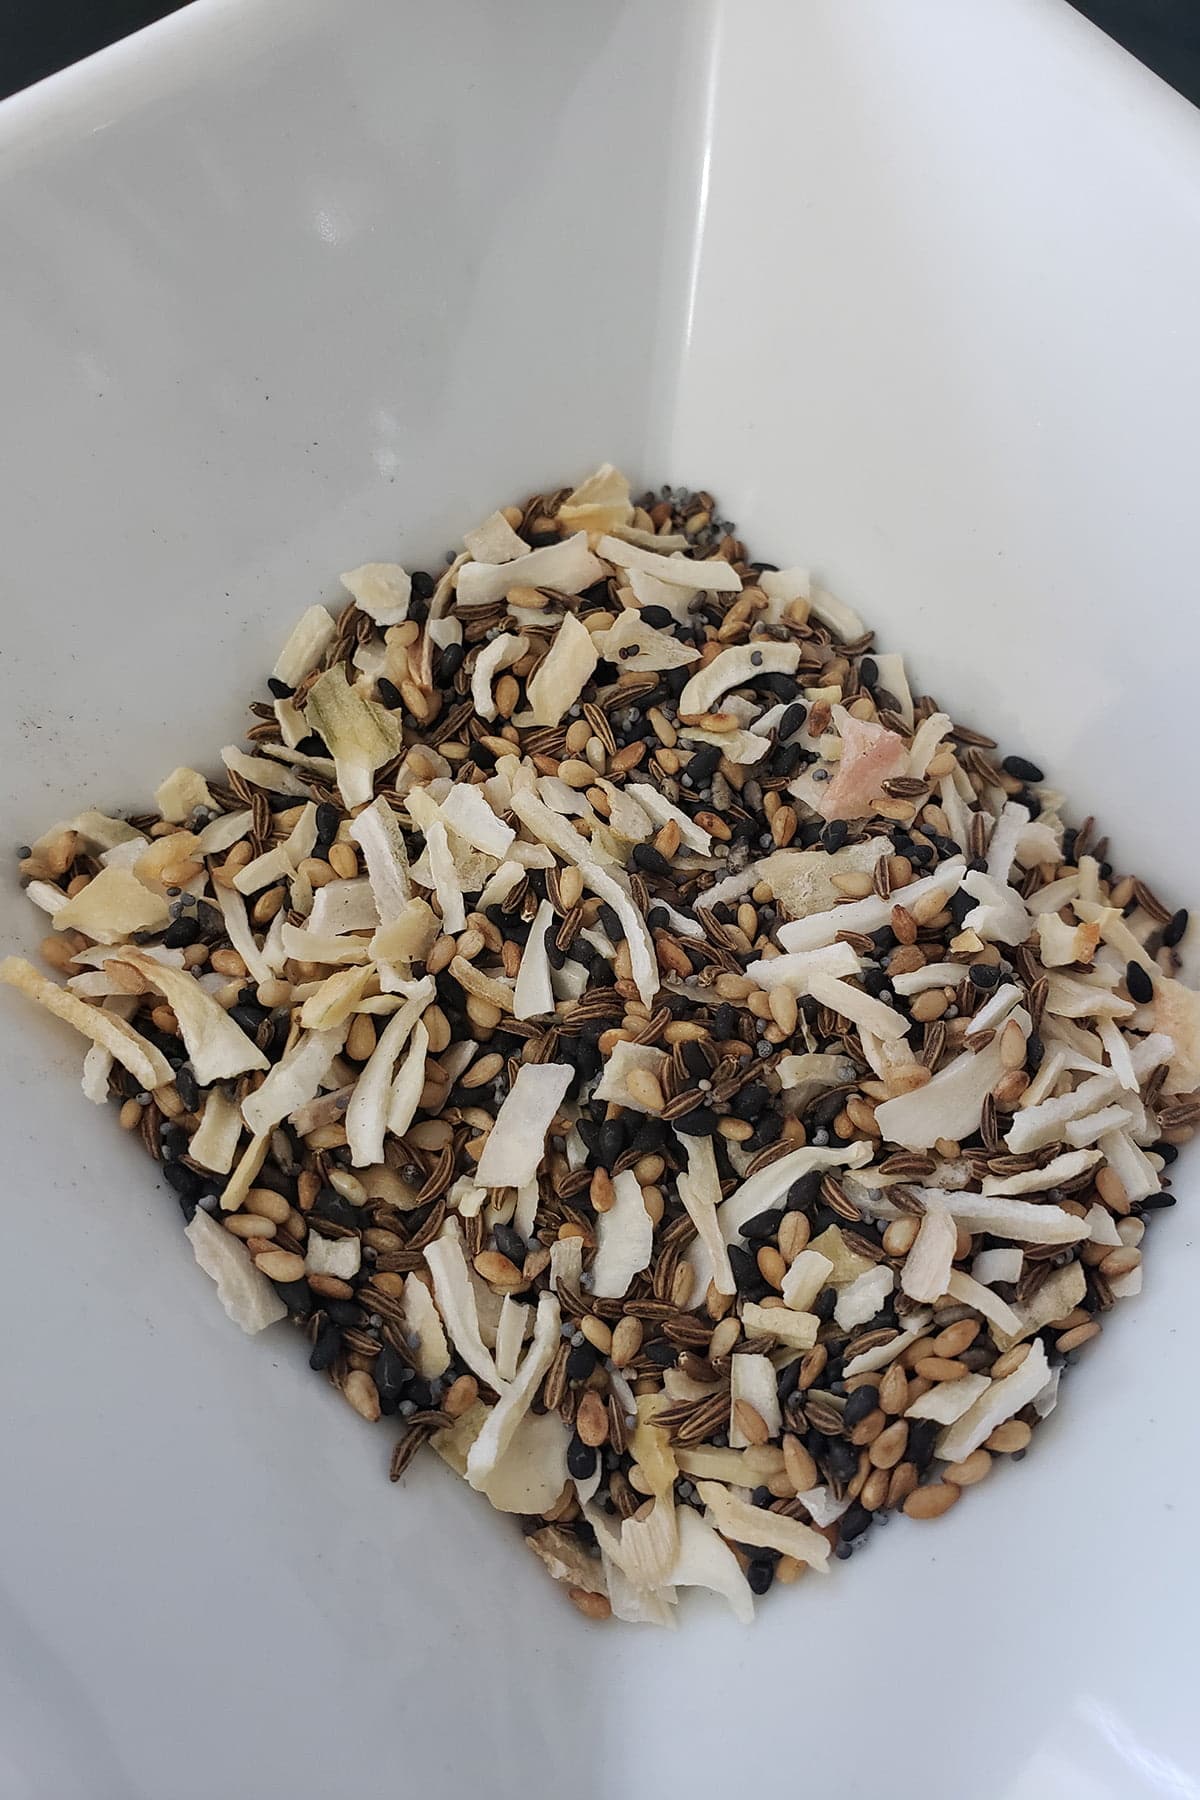 A close up view of a small white bowl filled with "everything" spice mix: Sesame seeds, caraway seeds, onion flakes, garlic flakes, poppy seeds, etc.